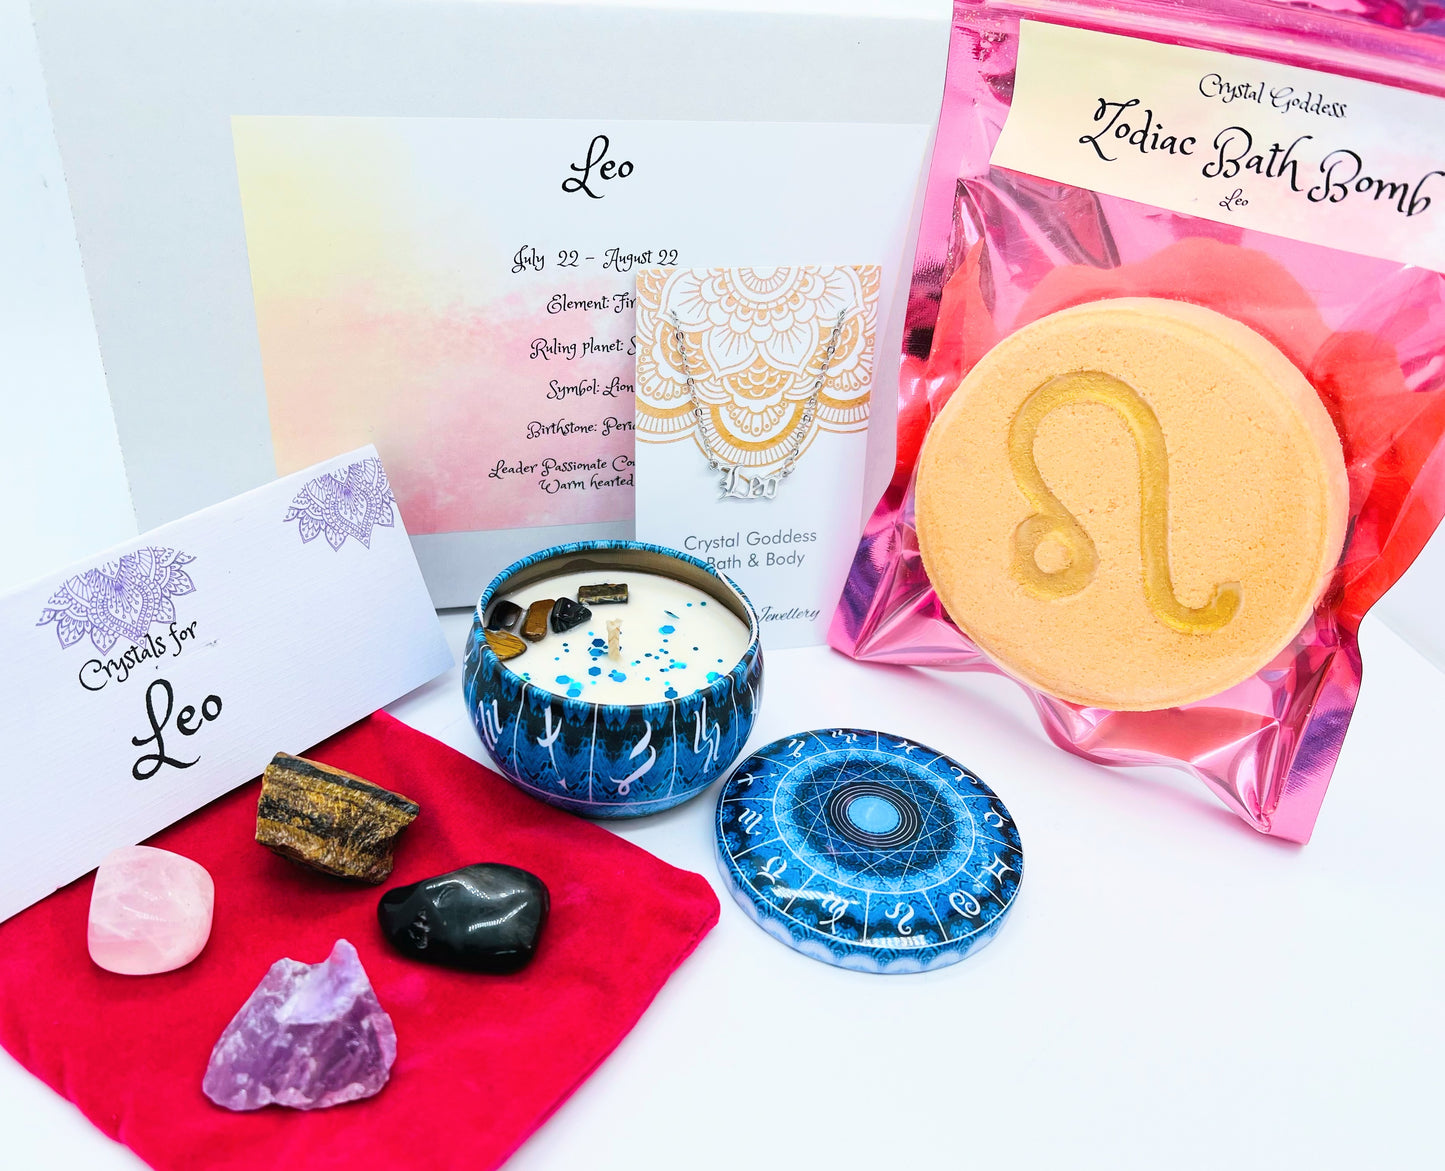 Leo zodiac gift box showing a set of four crystals, crystal candle, pendant and a bath bomb with the symbol for this sign on it.